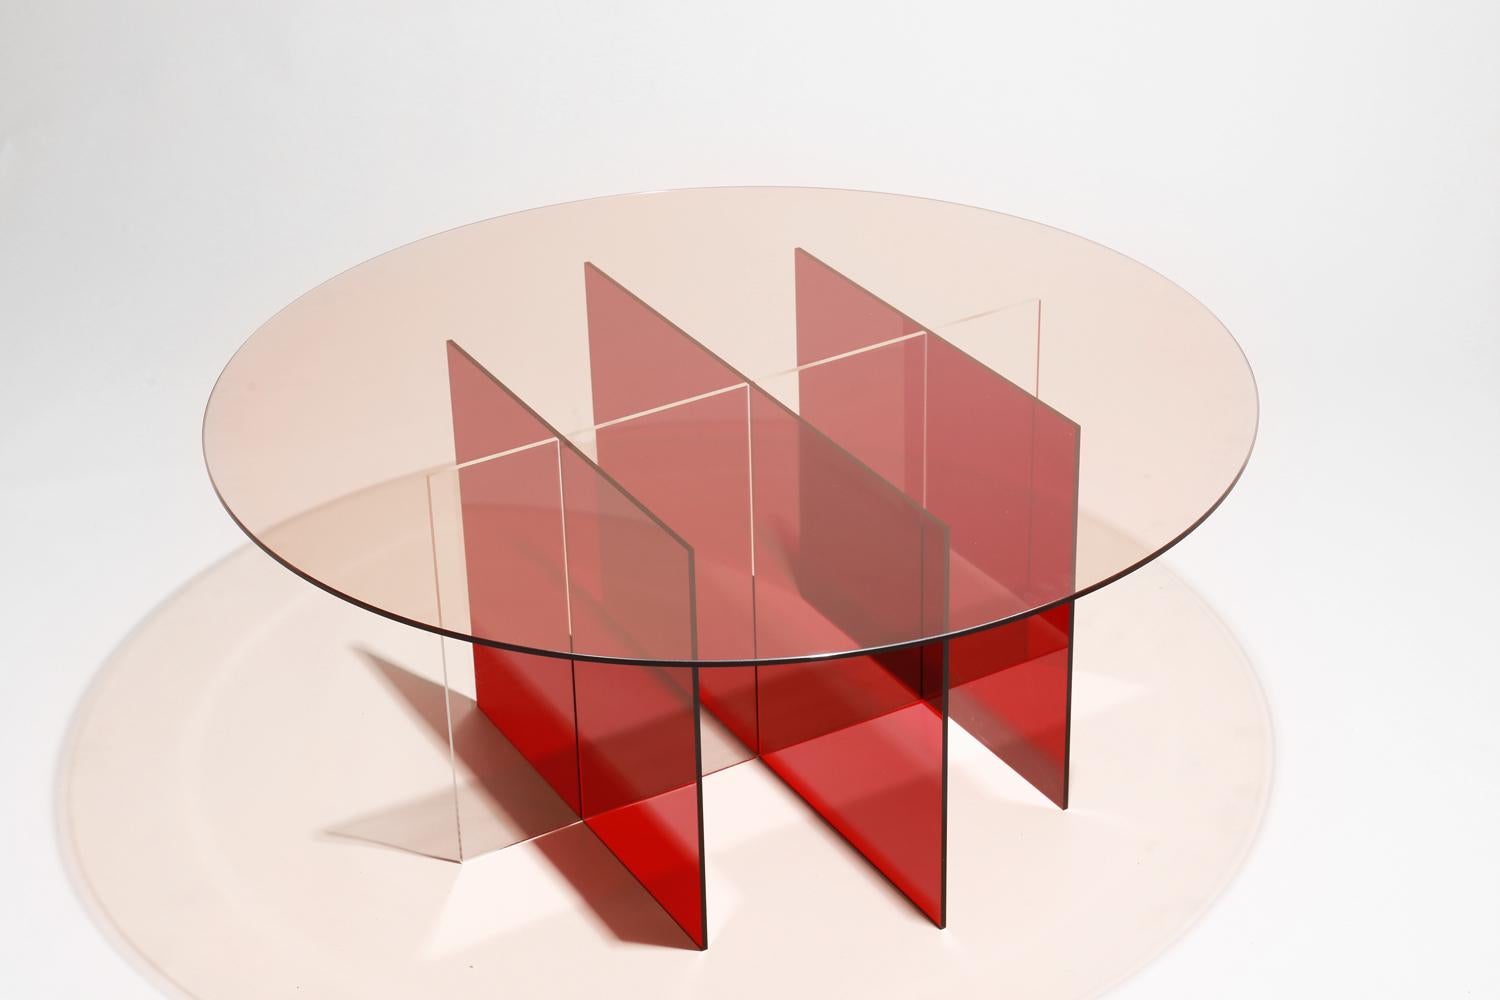 Made to order. Please allow 6 weeks for production.

The Sundial coffee table is an experiential furniture piece, with distinct profiles and playful interaction with light and shadow. The table appears paper thin from one angle and then the full